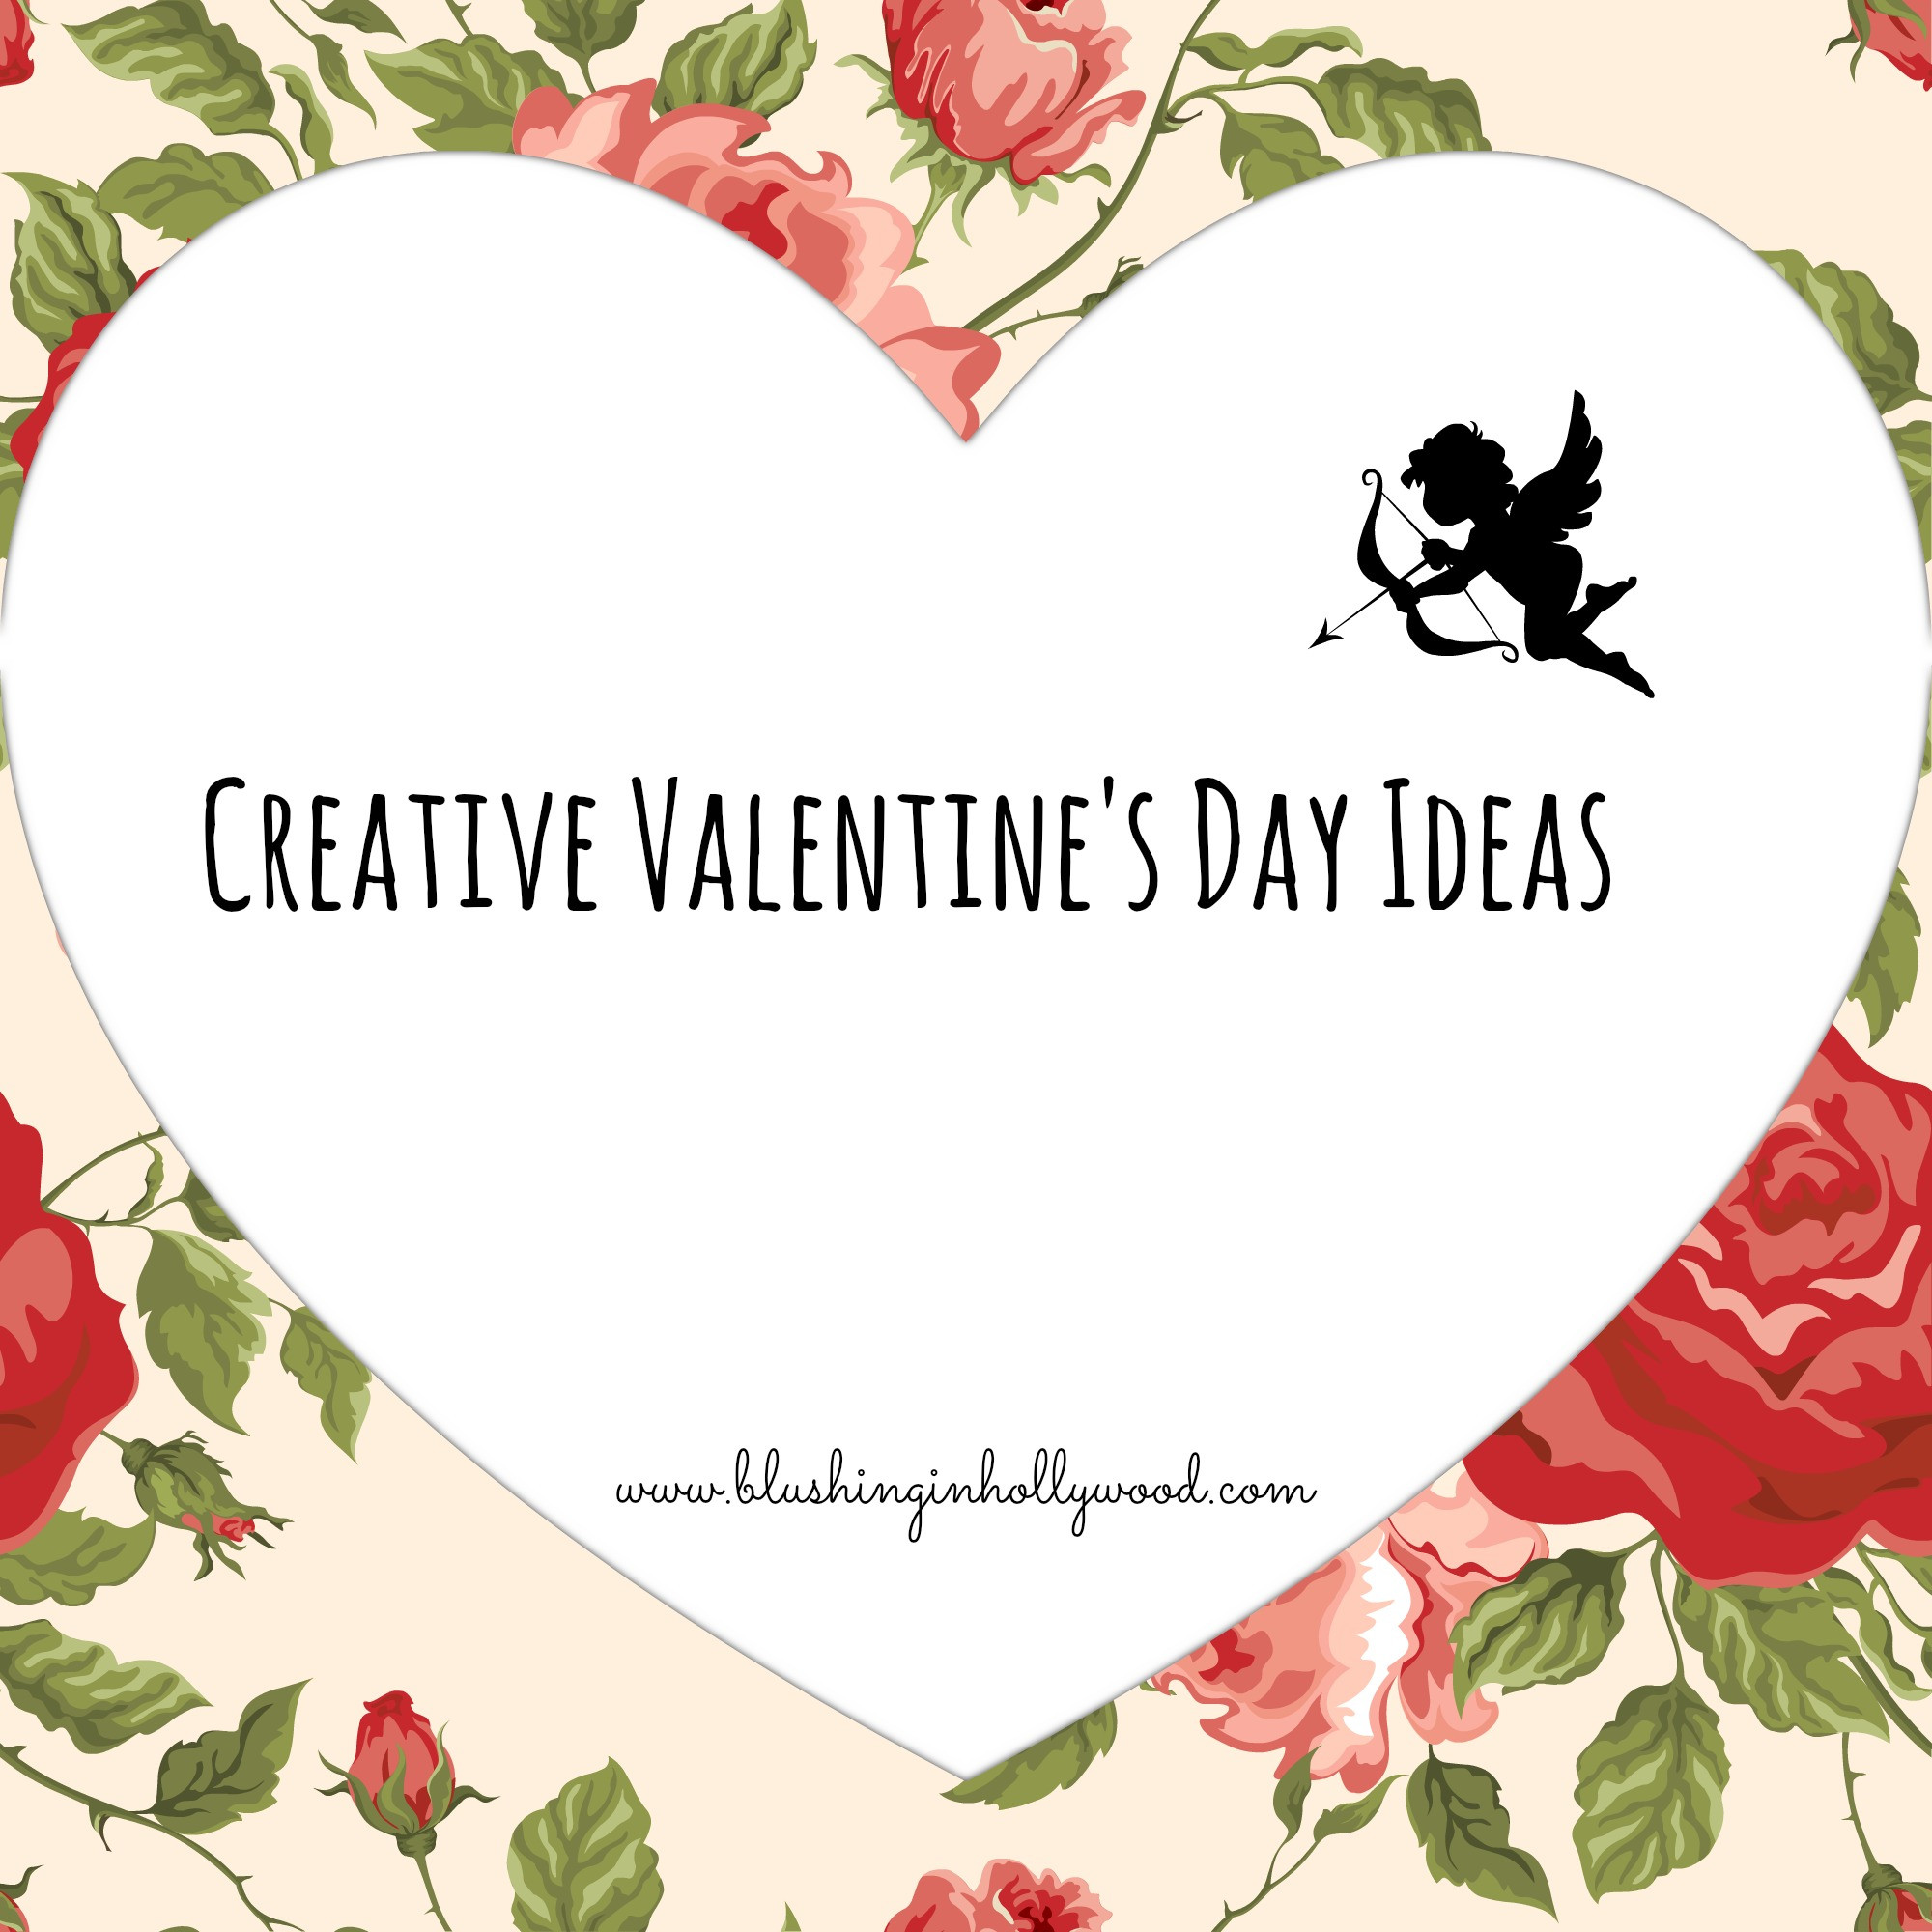 Creative Valentines Day Ideas
 Creative Valentine s Day Ideas Blushing in Hollywood